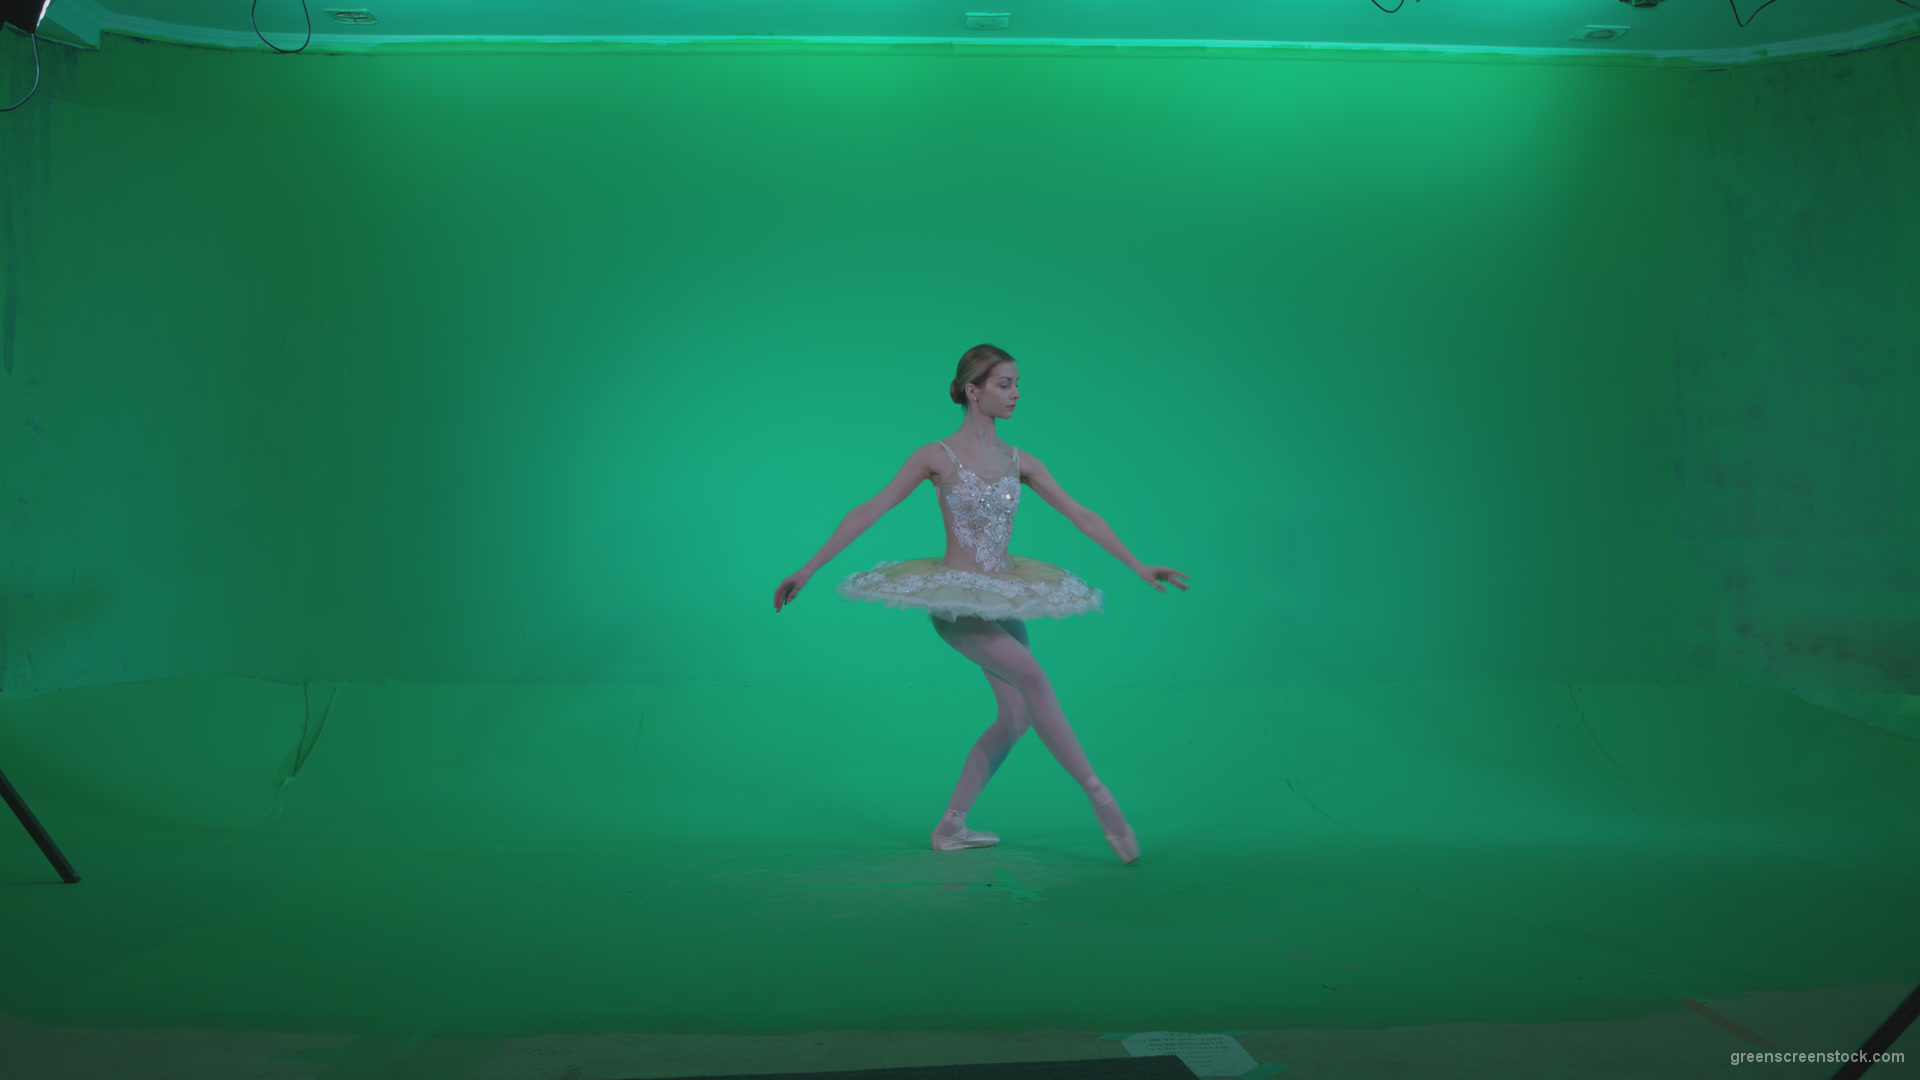 Ballet-White-Swan-s13-new-Green-Screen-Video-Footage_006 Green Screen Stock